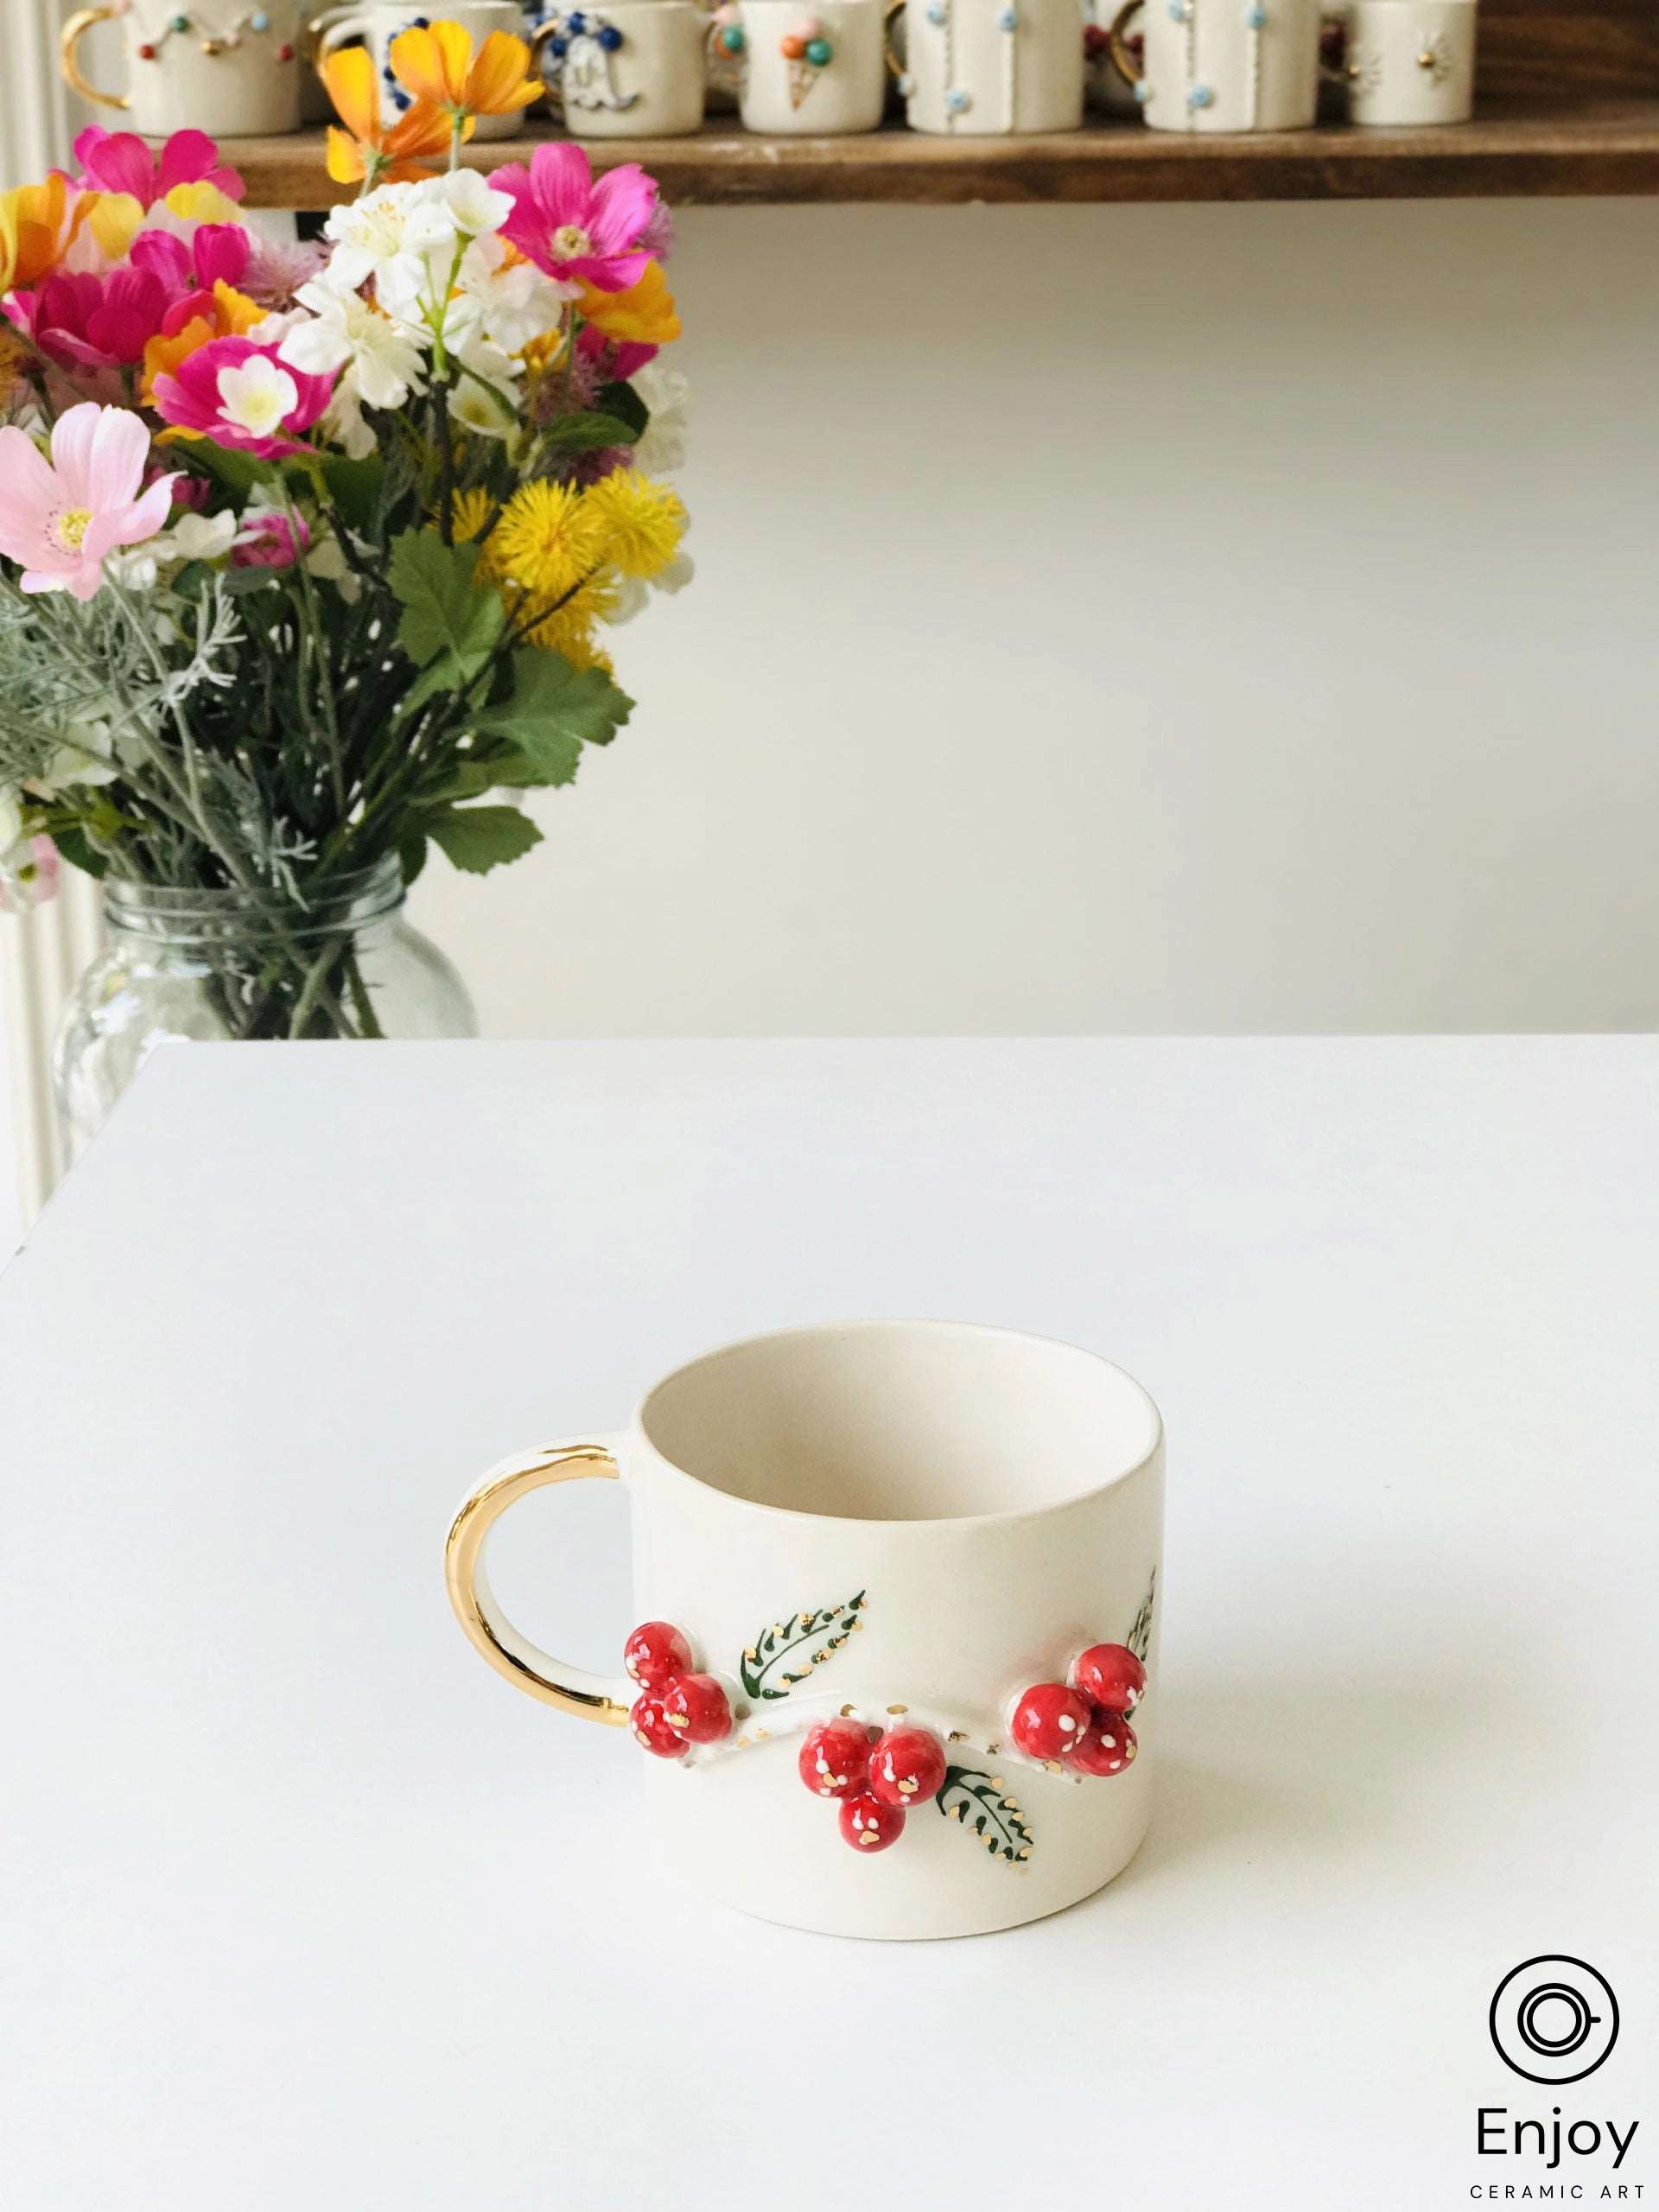 A cream-colored mug with red berry and green leaf design, golden handle, beside a vibrant bouquet on a white tabletop.